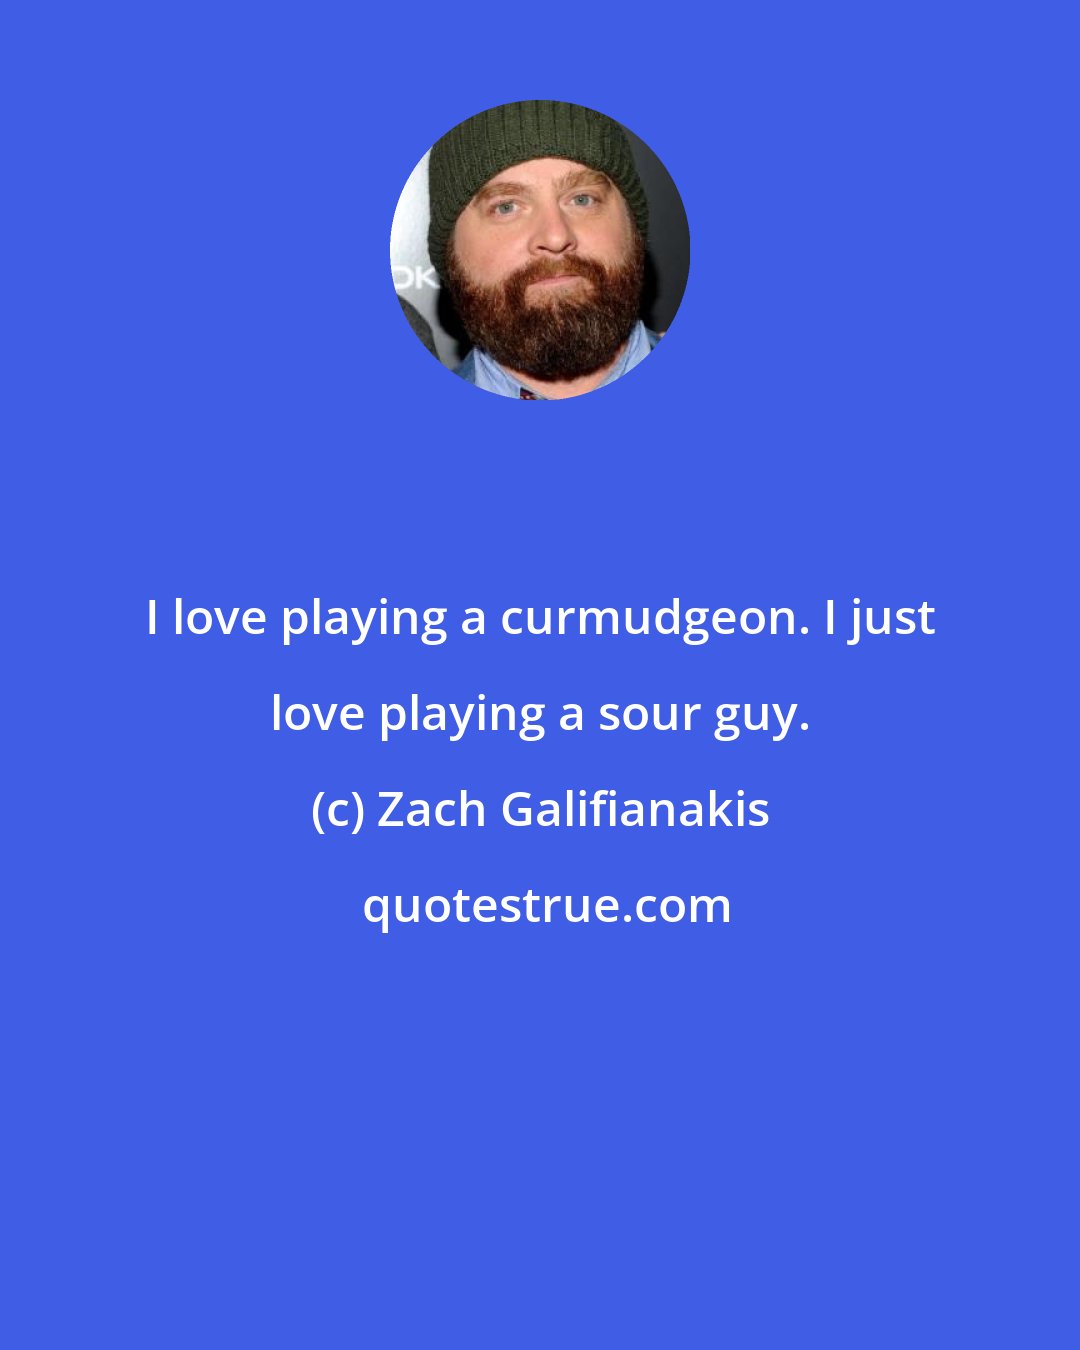 Zach Galifianakis: I love playing a curmudgeon. I just love playing a sour guy.